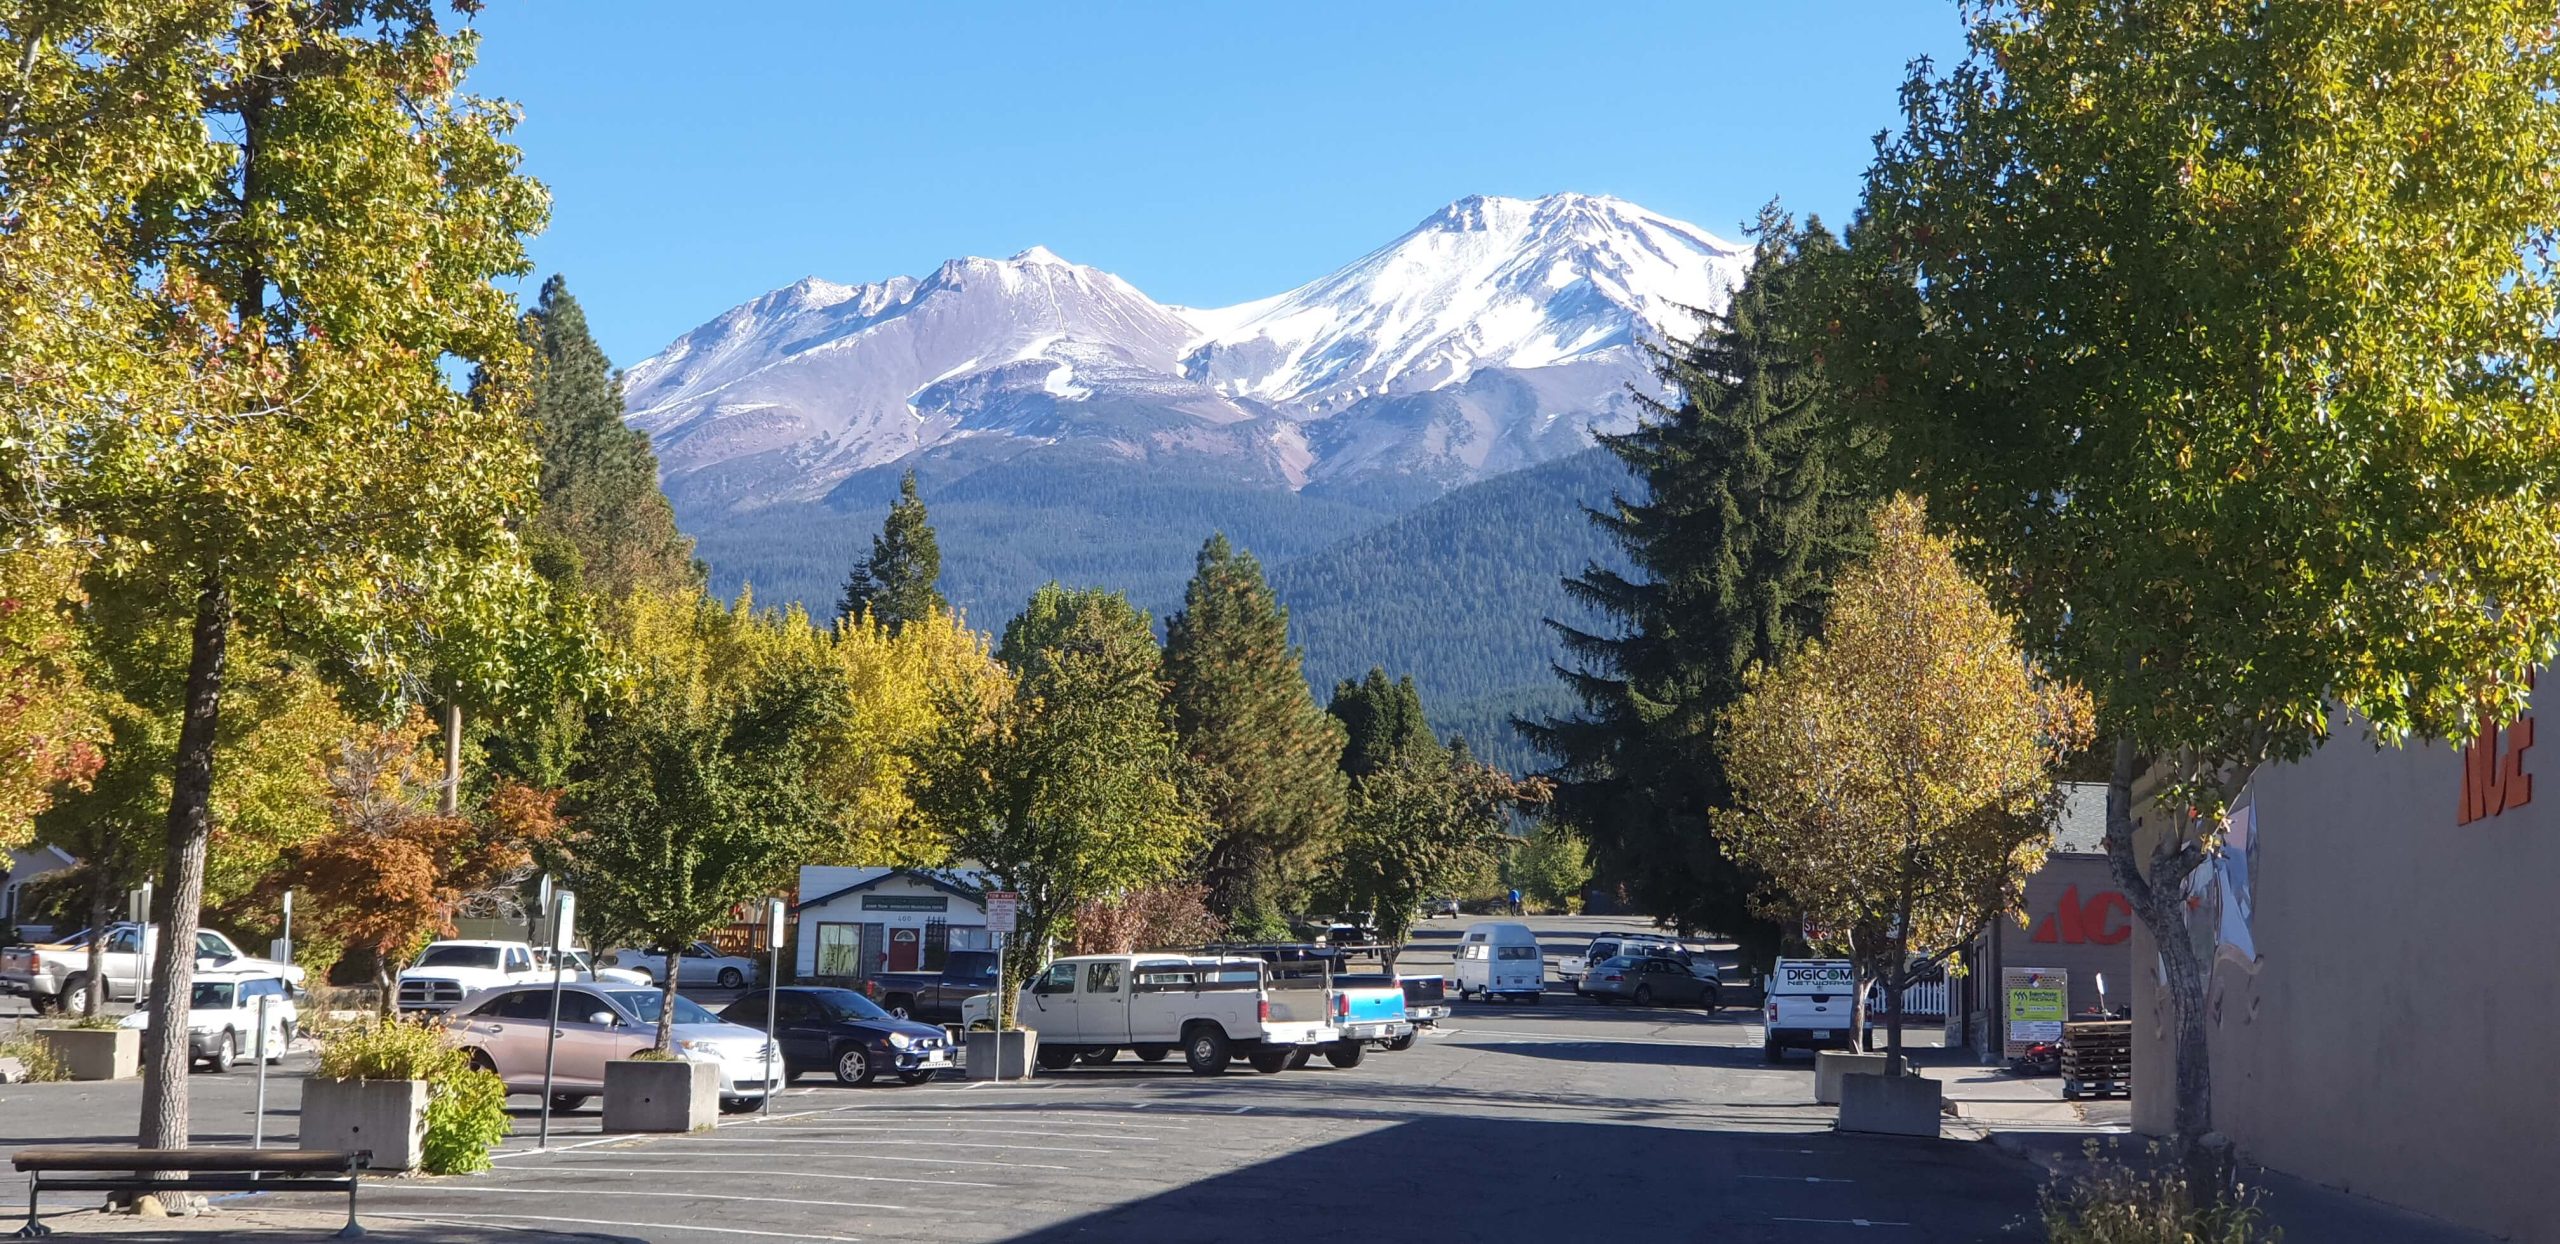 Mt Shasta View from city center